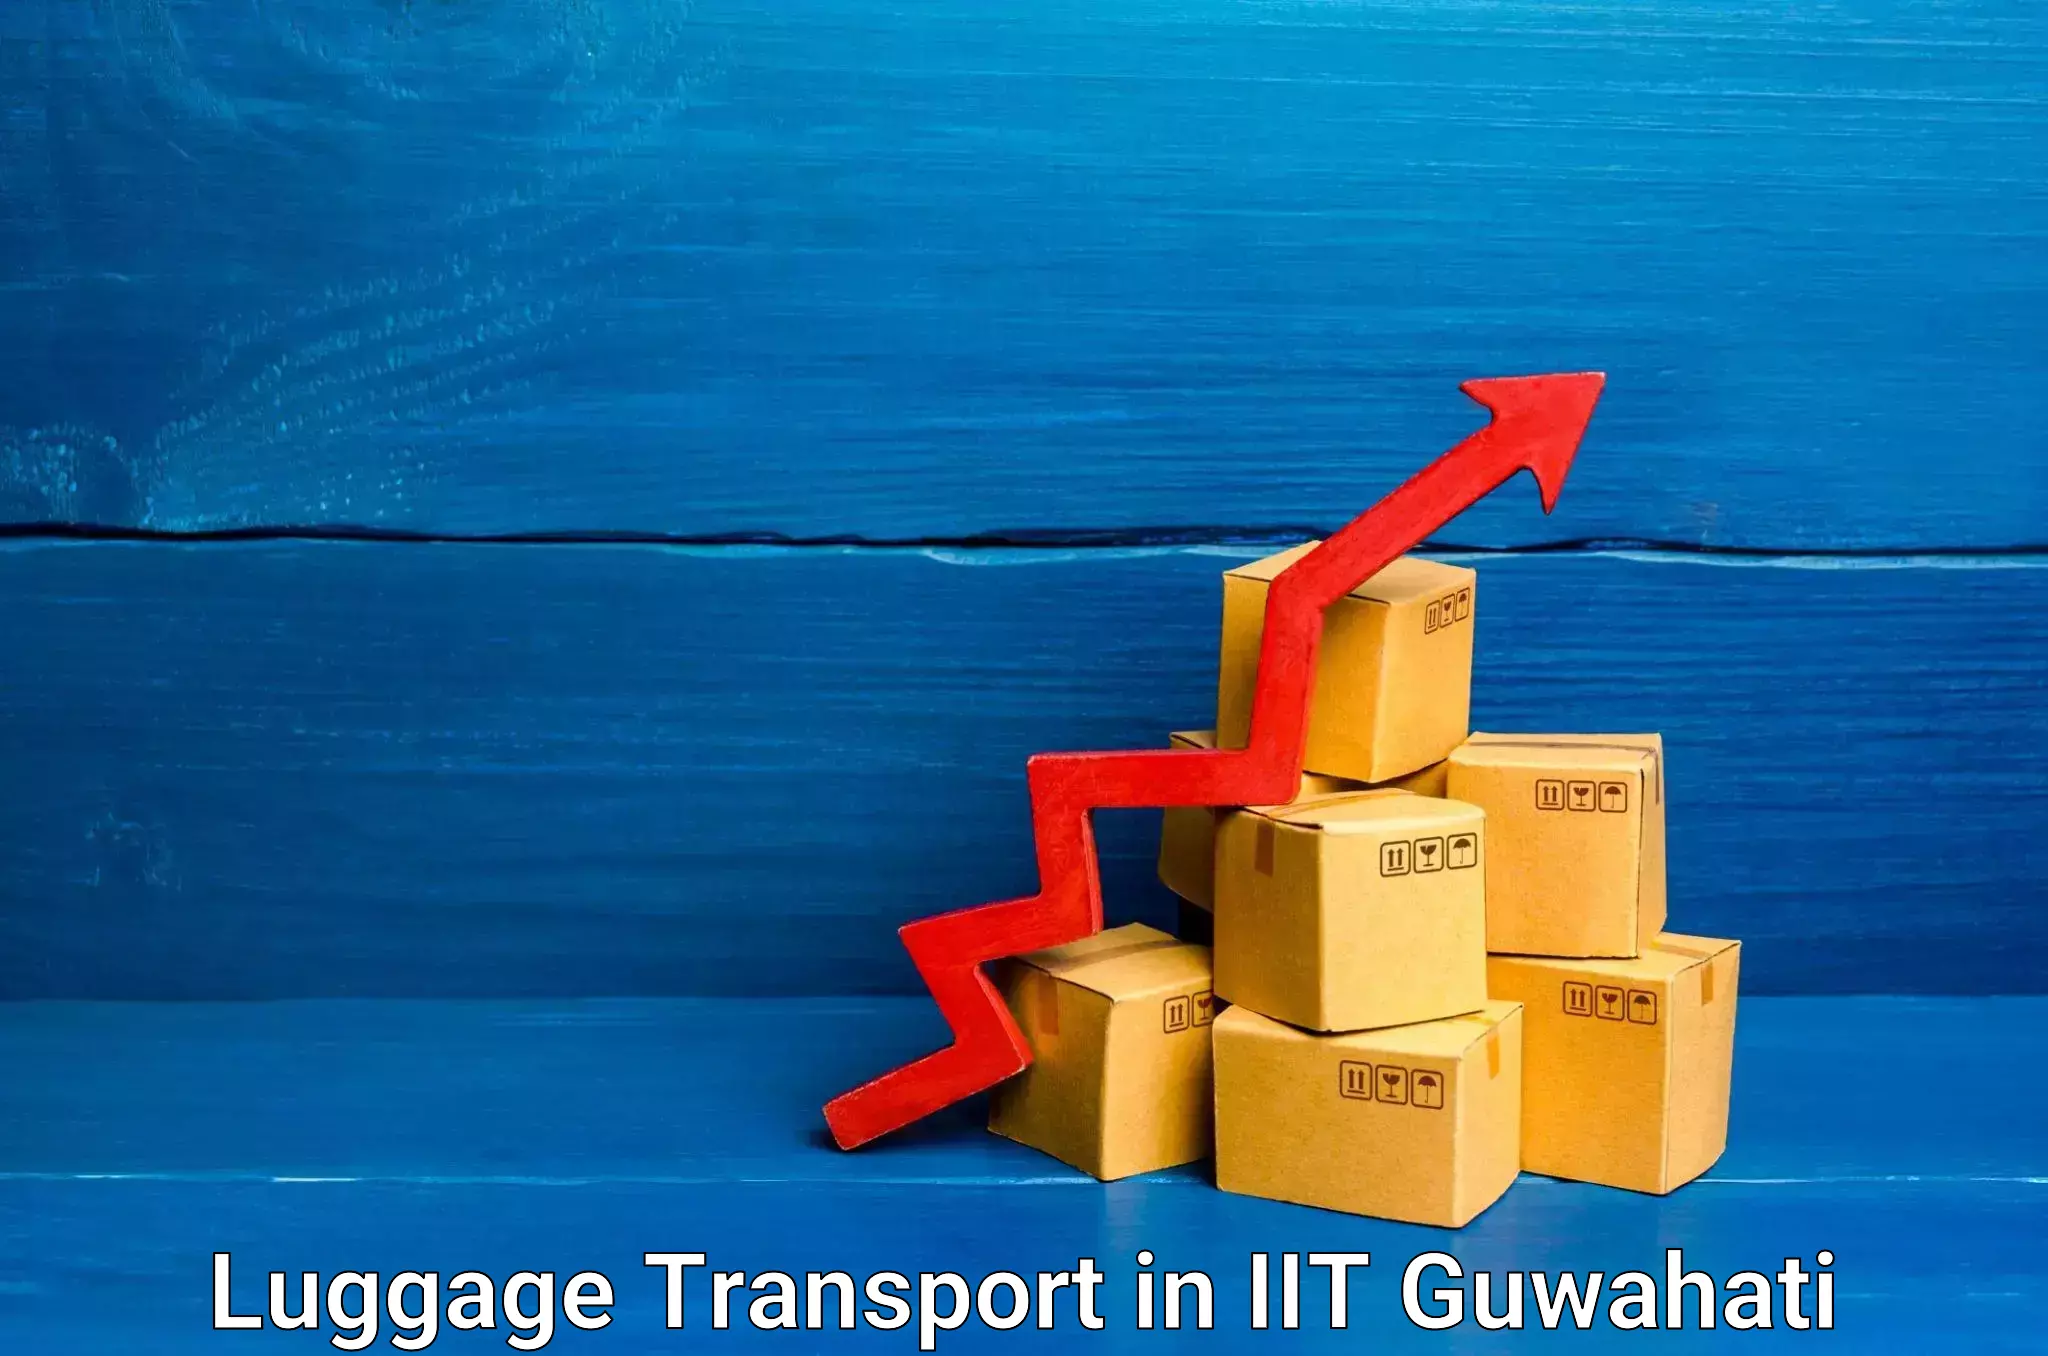 Instant baggage transport quote in IIT Guwahati